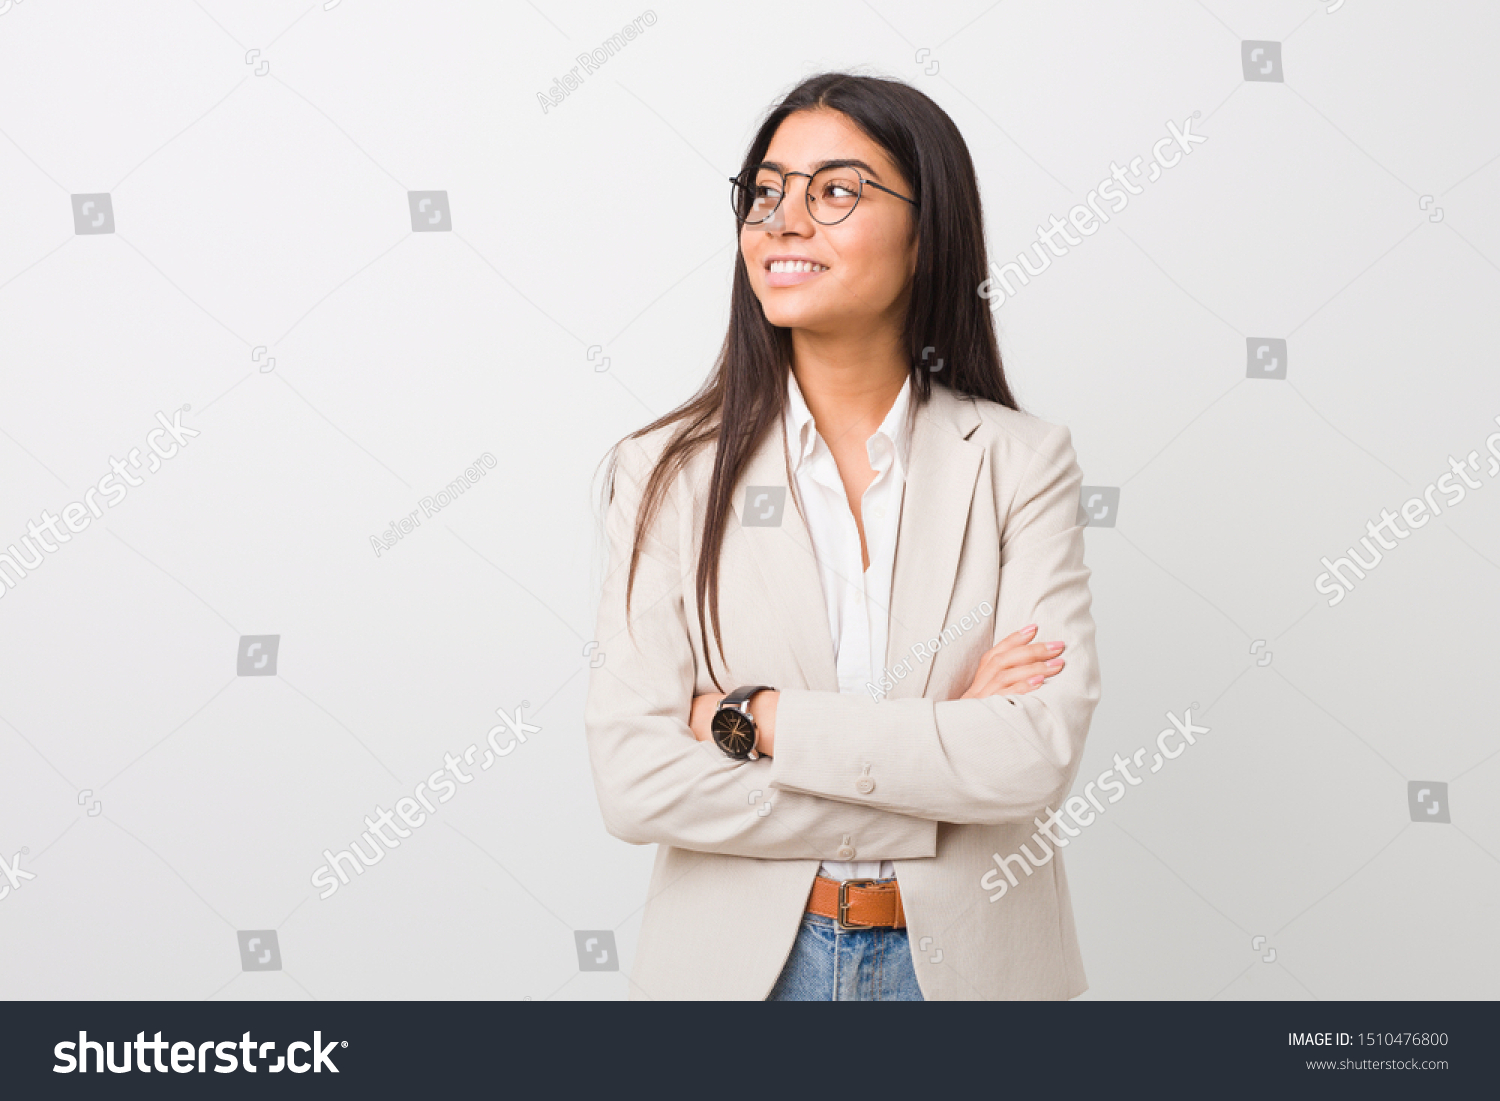 Young business arab woman isolated against a white background smiling confident with crossed arms. #1510476800